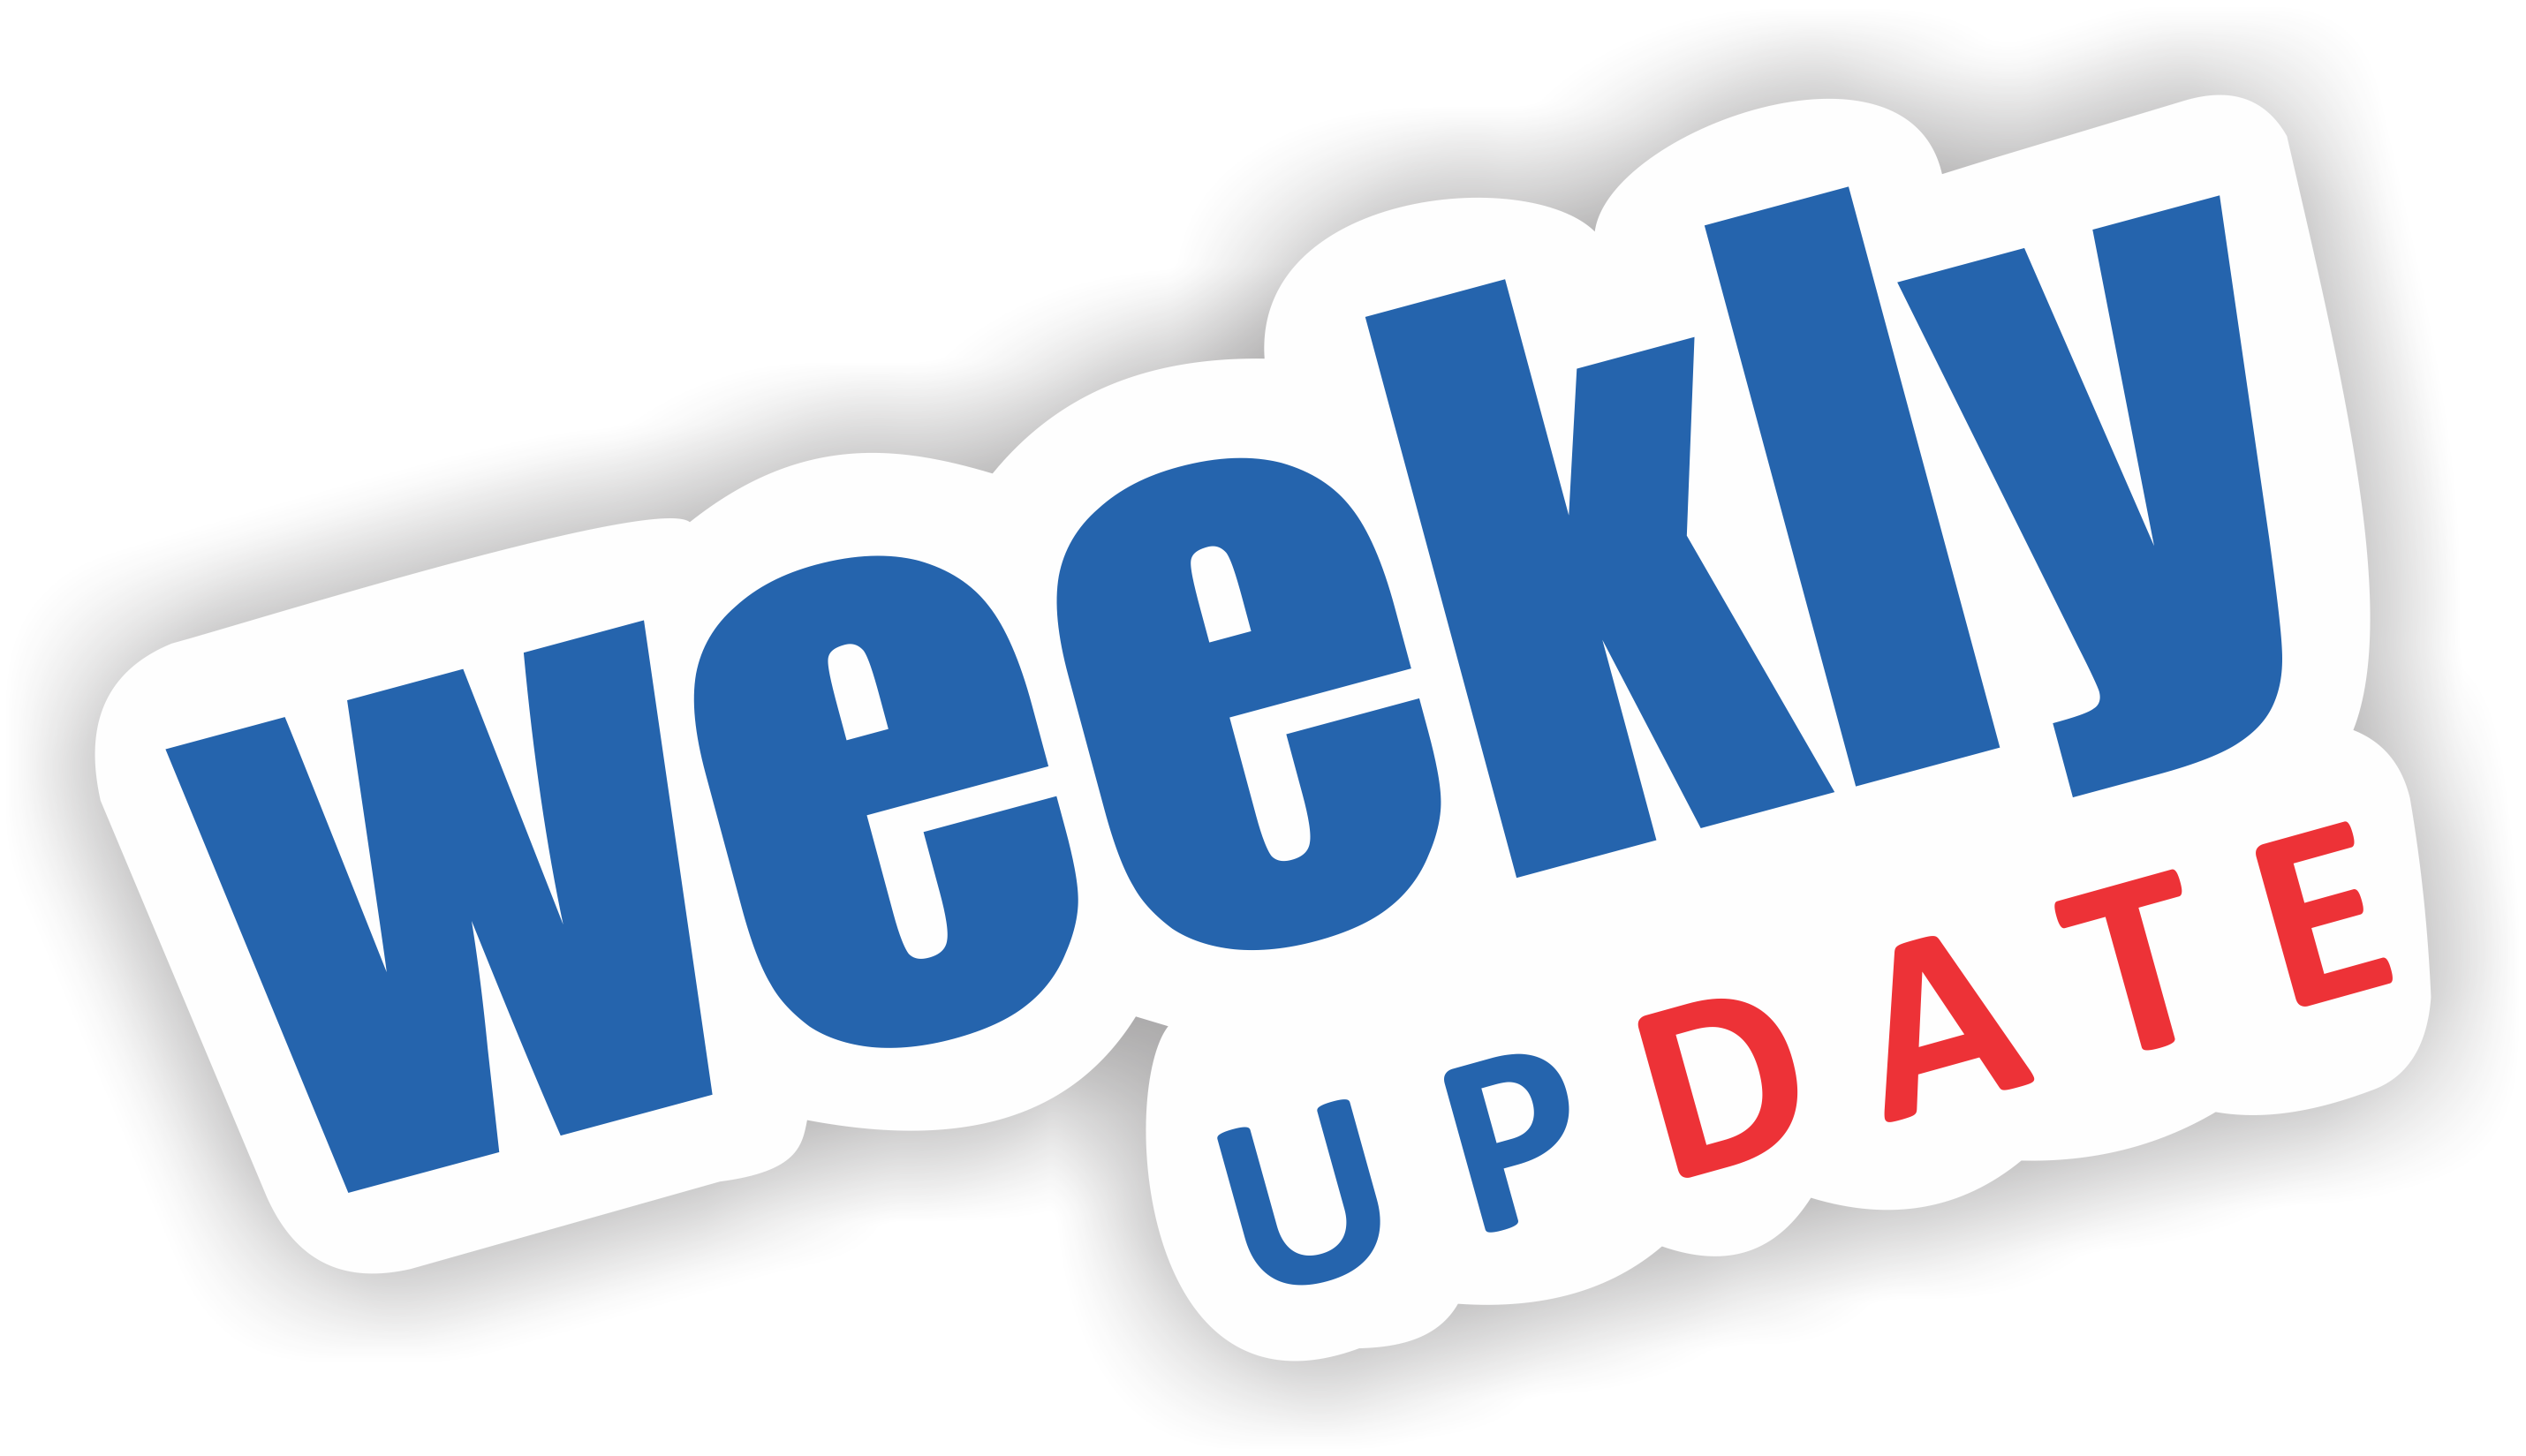 Pax Stereo Tv Weekly Update: We Are Finishing Our Upgrading & Getting Ready For The New Season! (9-15-19)